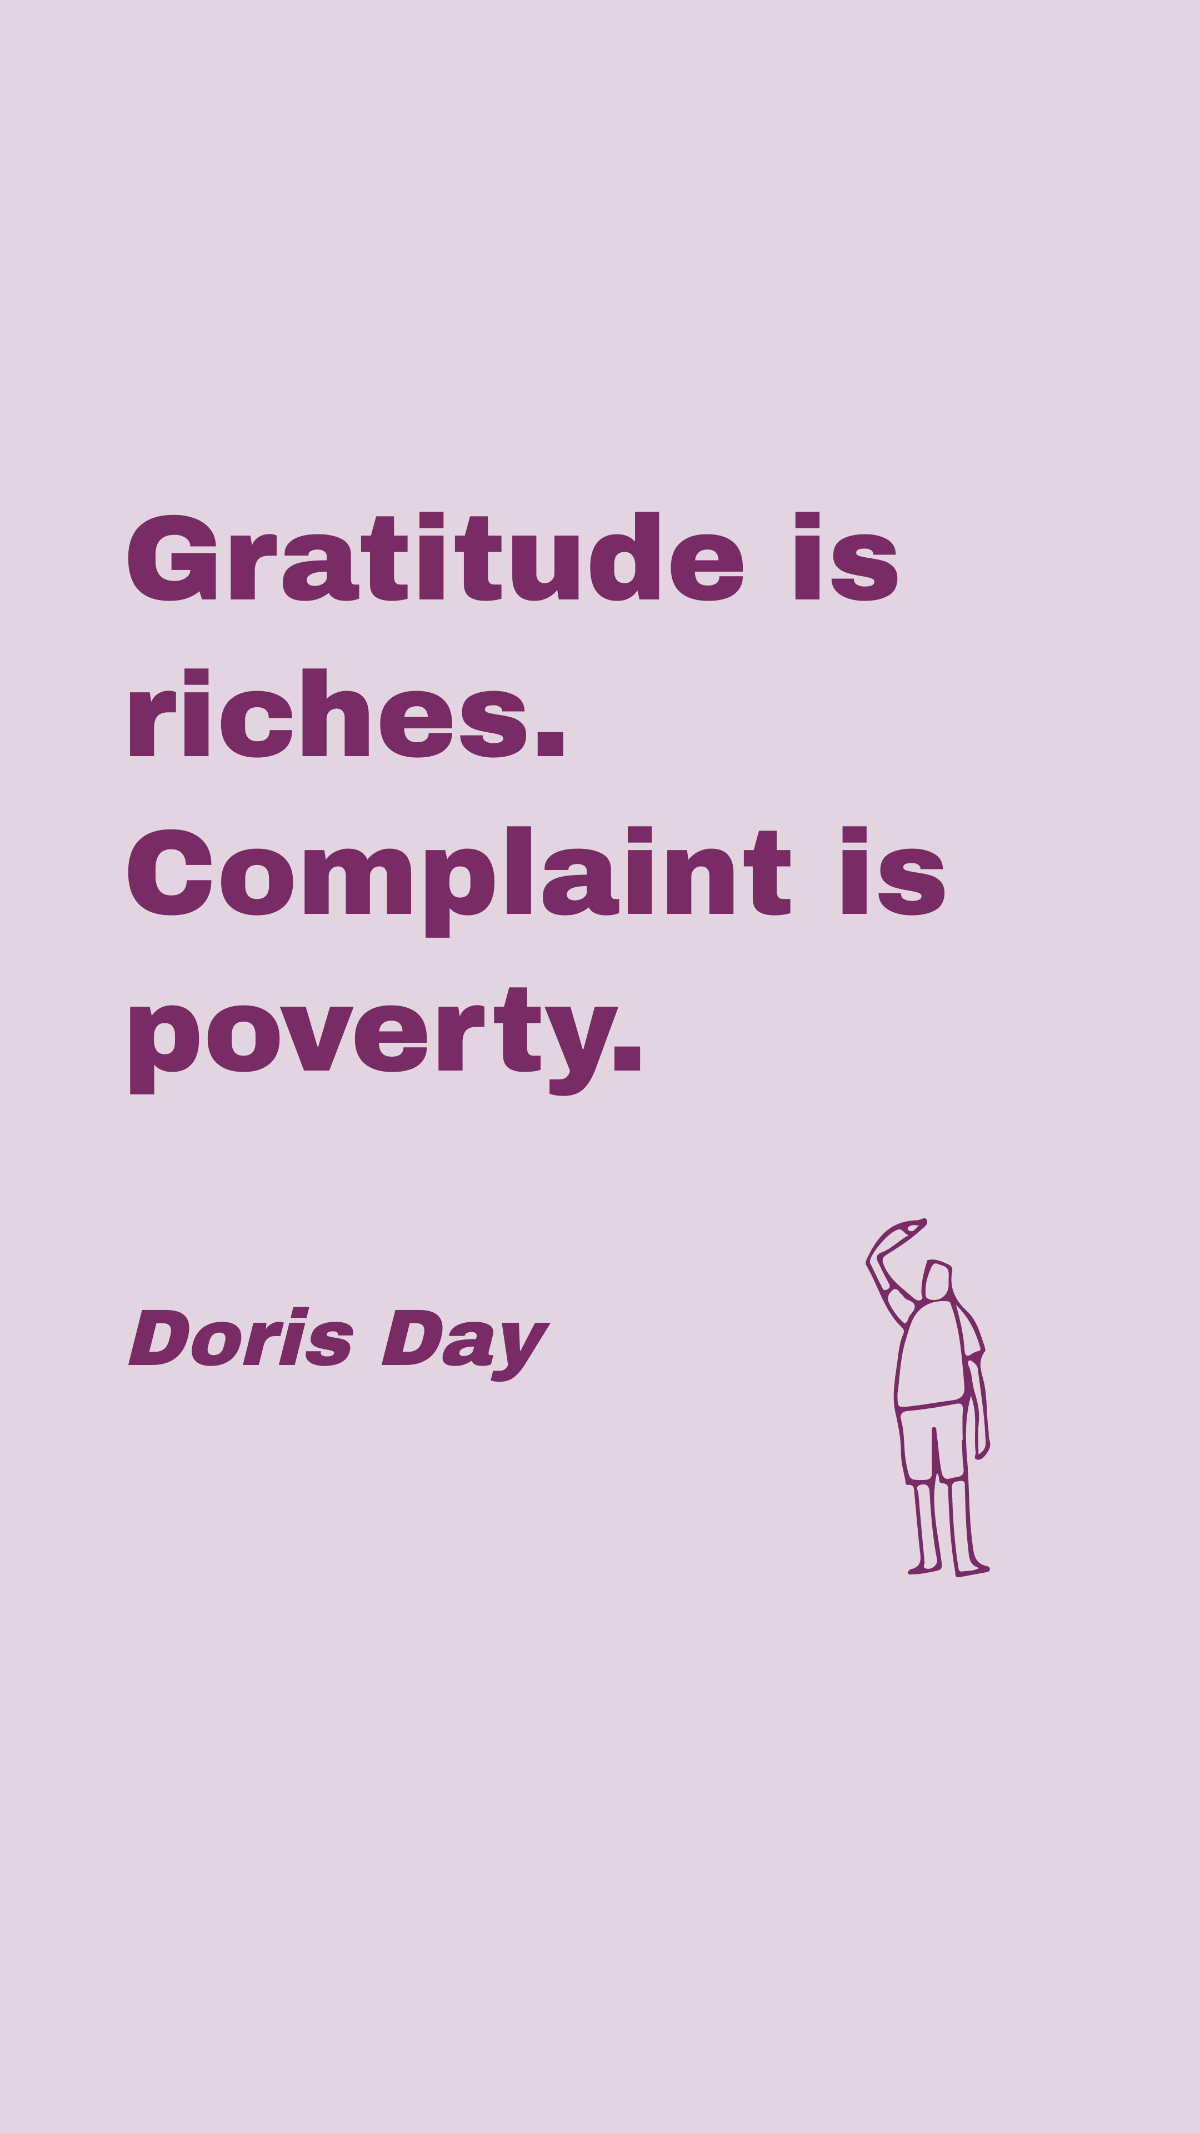 Doris Day - Gratitude is riches. Complaint is poverty. Template